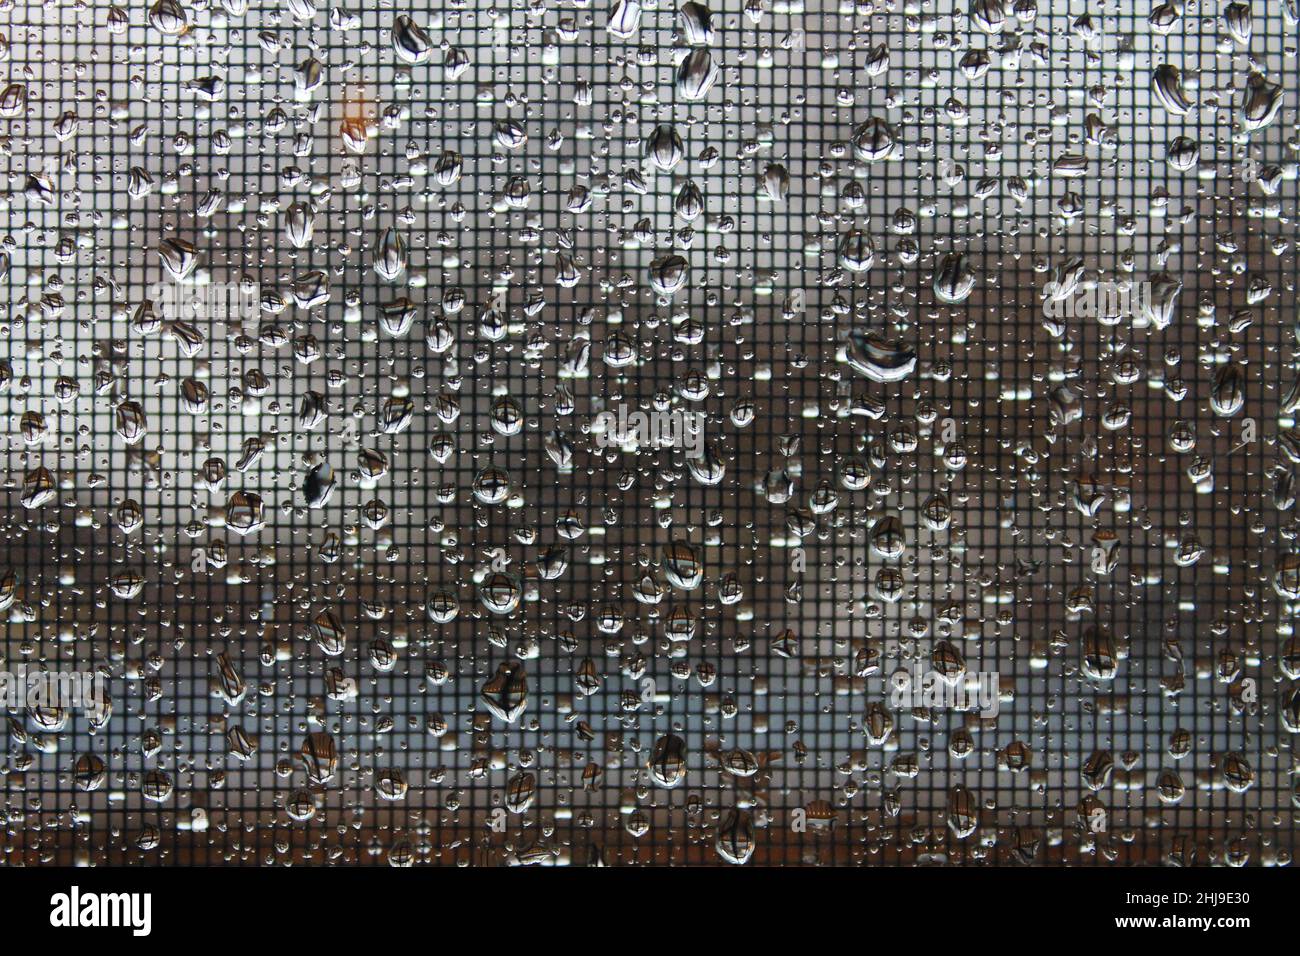 Close-up of raindrops accumulated on a wondow and wire mesh screen. Stock Photo